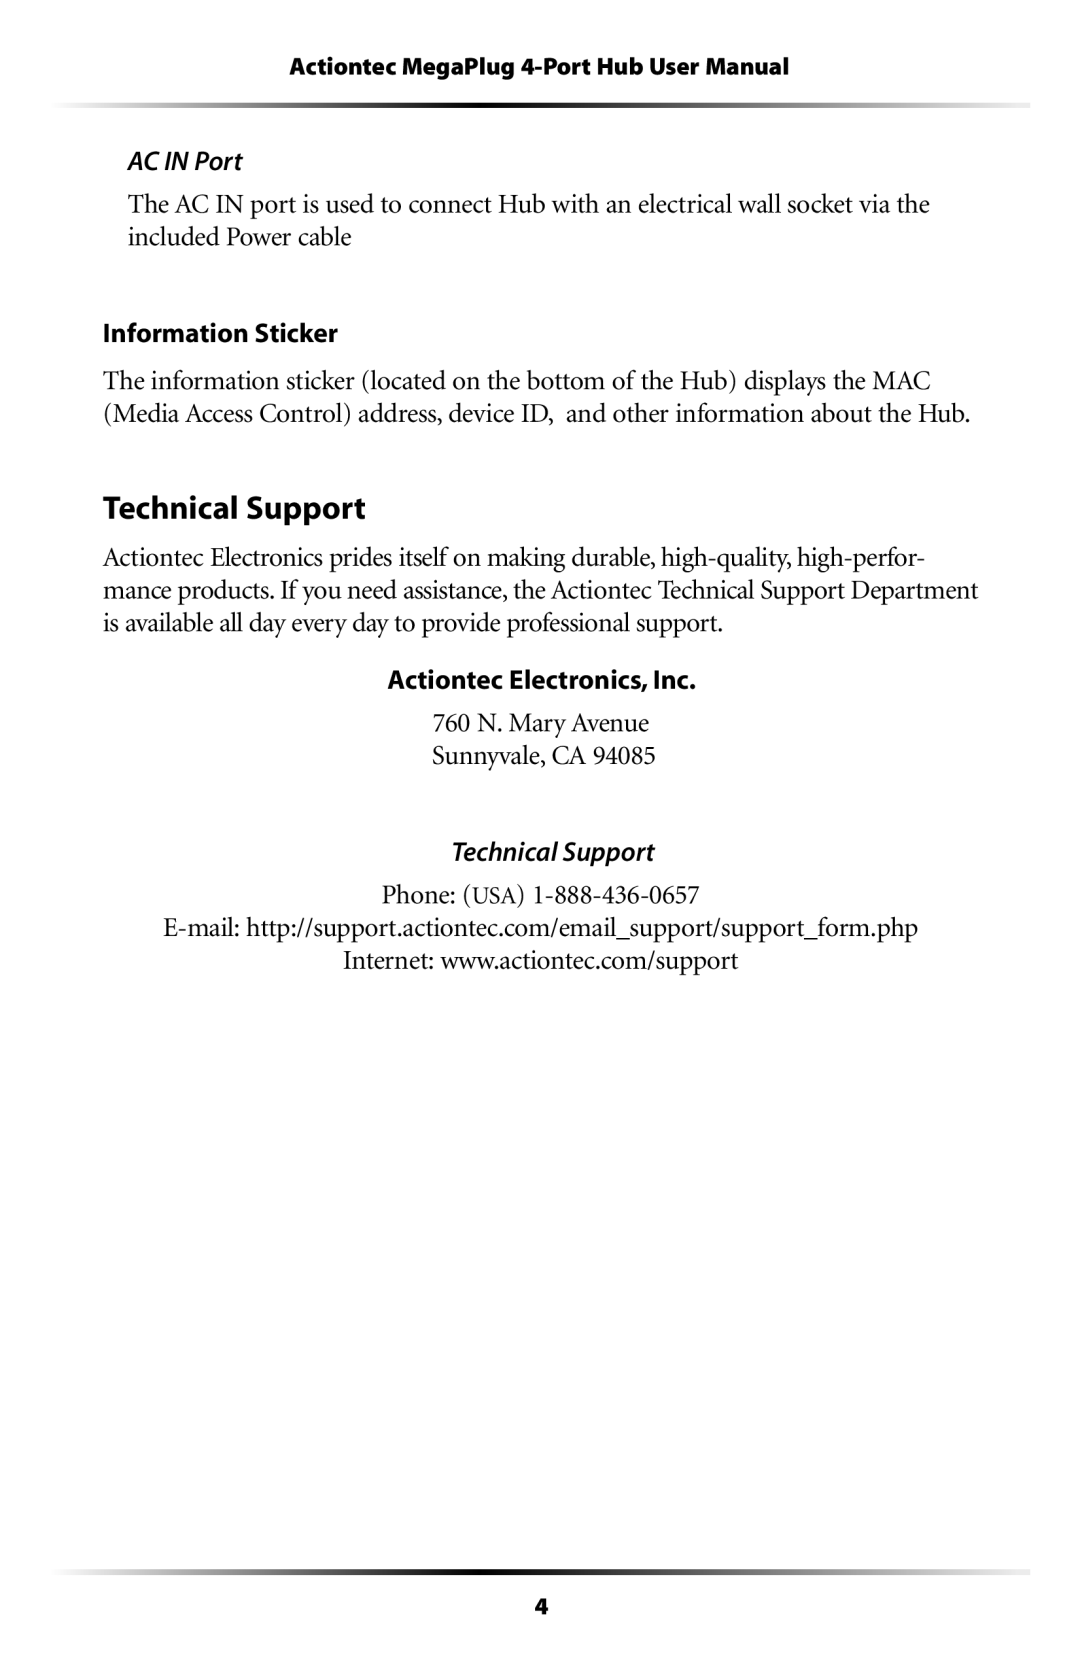 Actiontec electronic HPE400T user manual Technical Support 